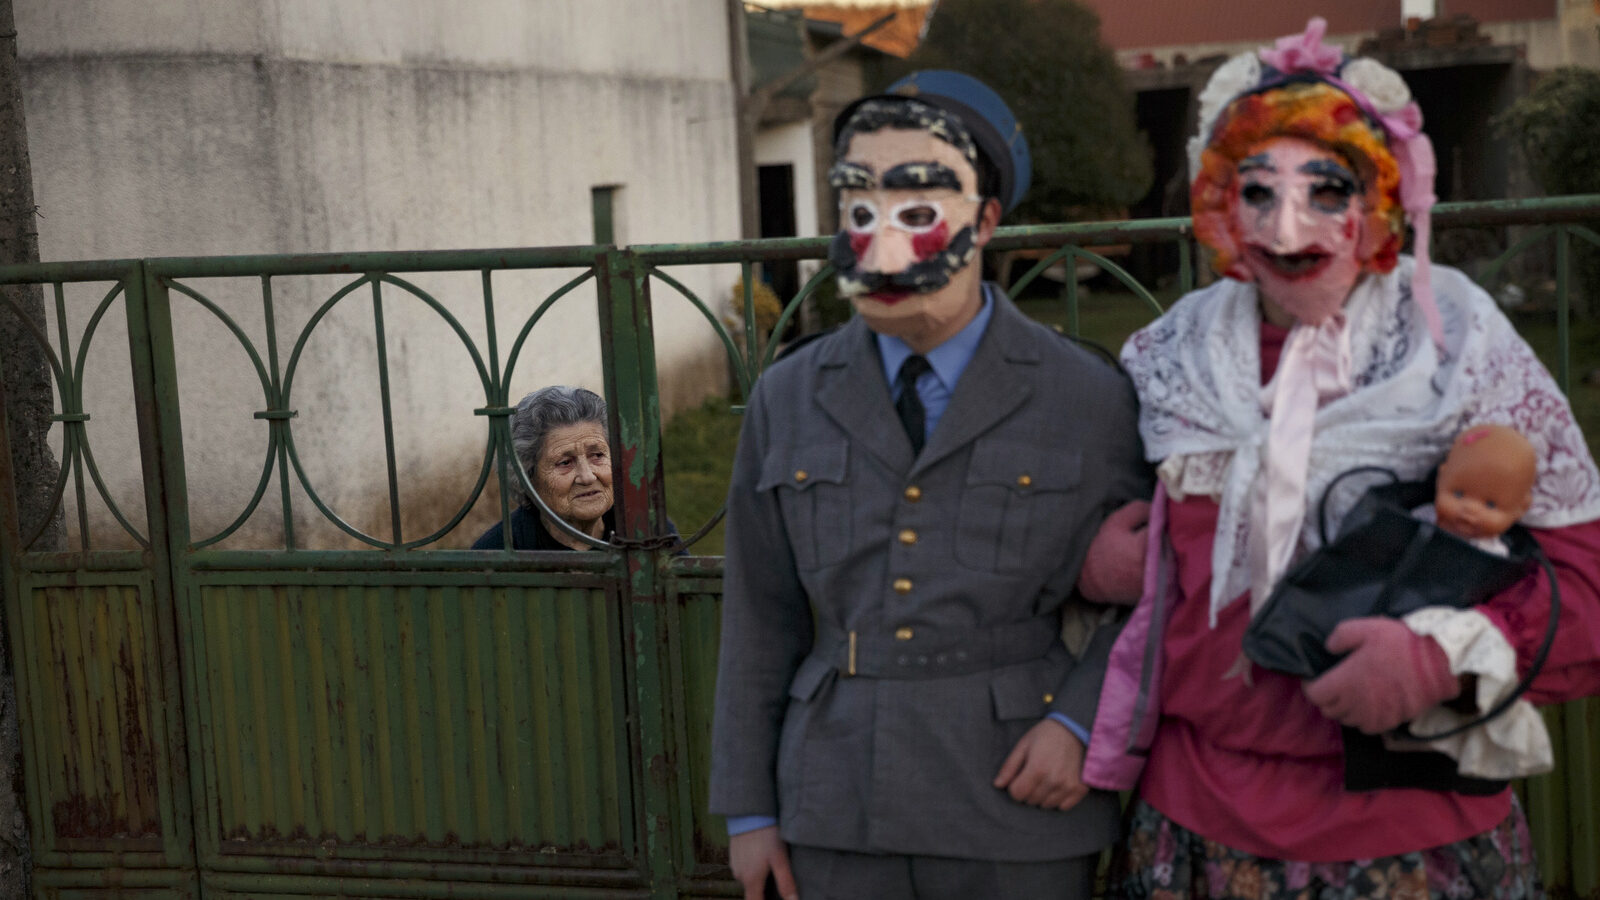 In this photo taken on Saturday, Jan. 7, 2017, a couple dressed as characters from 'la Vaquilla' wearing ancient masks pose for a photo, during a winter masquerade gathering in Salsas, Portugal. Many of these masquerades are of ancient origin and can often be traced to pre-Christian Celtic and often pre-Roman traditions around the renewal of fertility and life and an end of winter. (AP/Daniel Ochoa de Olza)